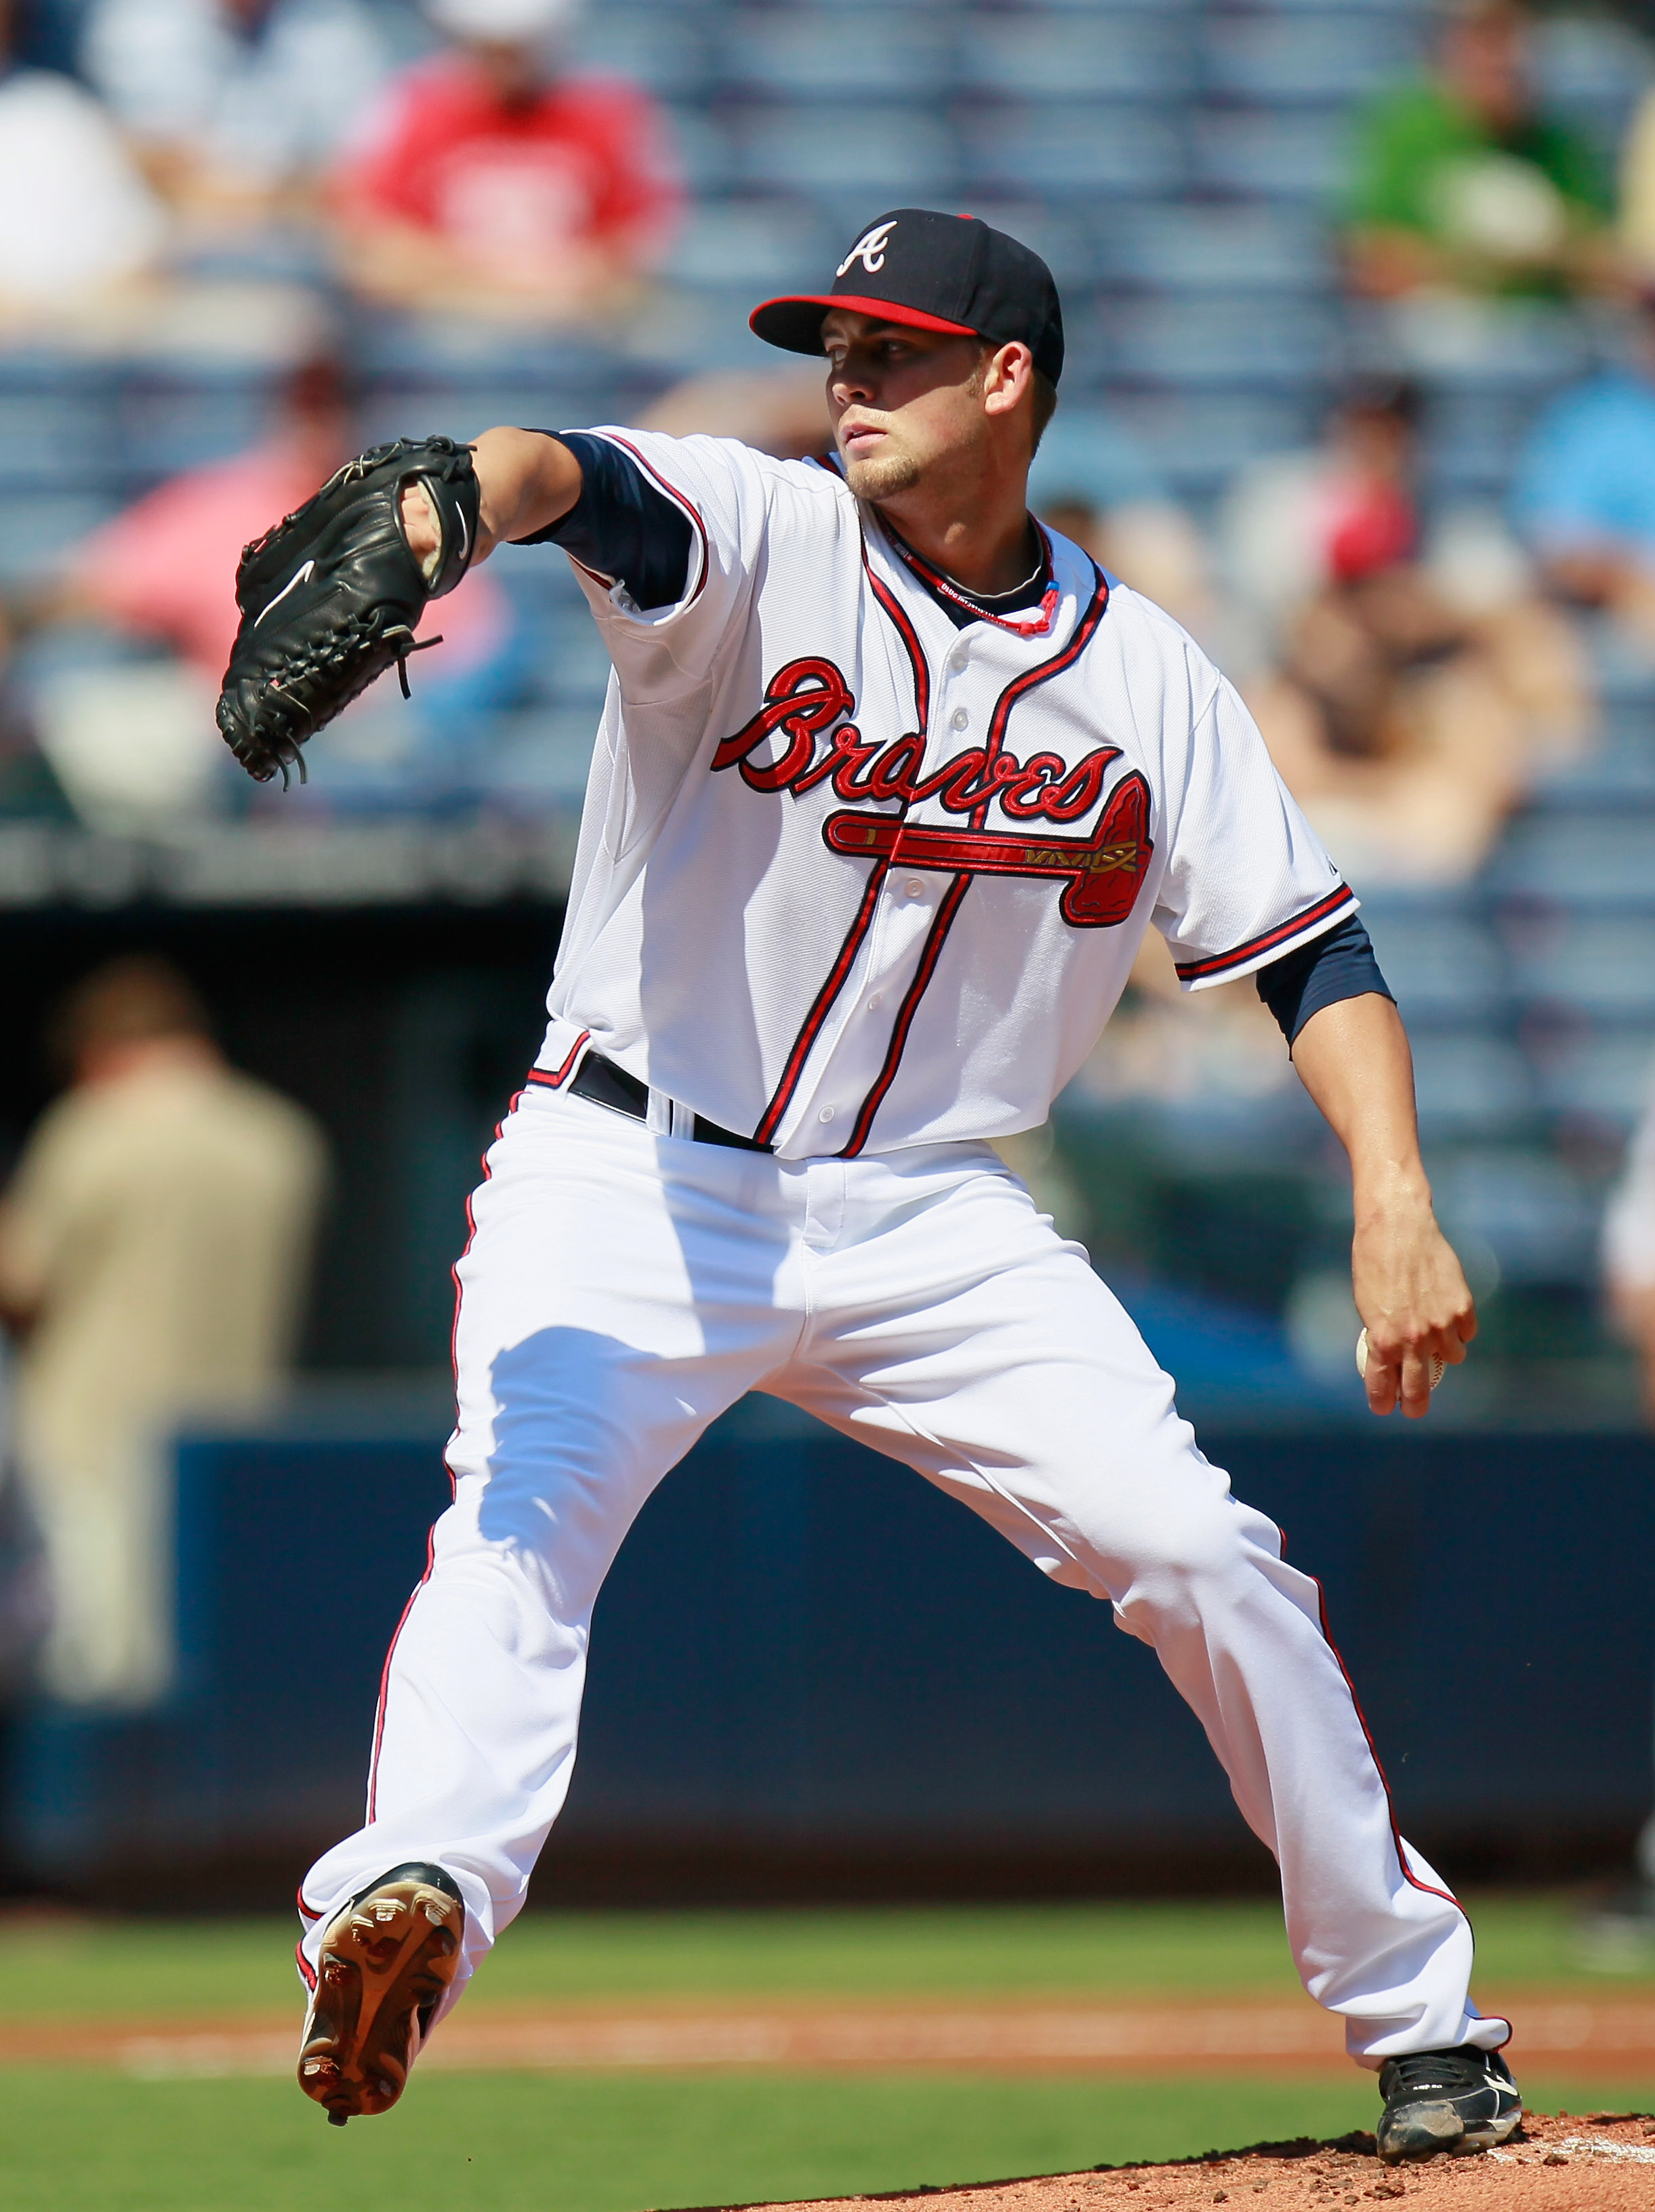 Mike Minor looks to help shore up the back-end of the Braves rotation in 2011